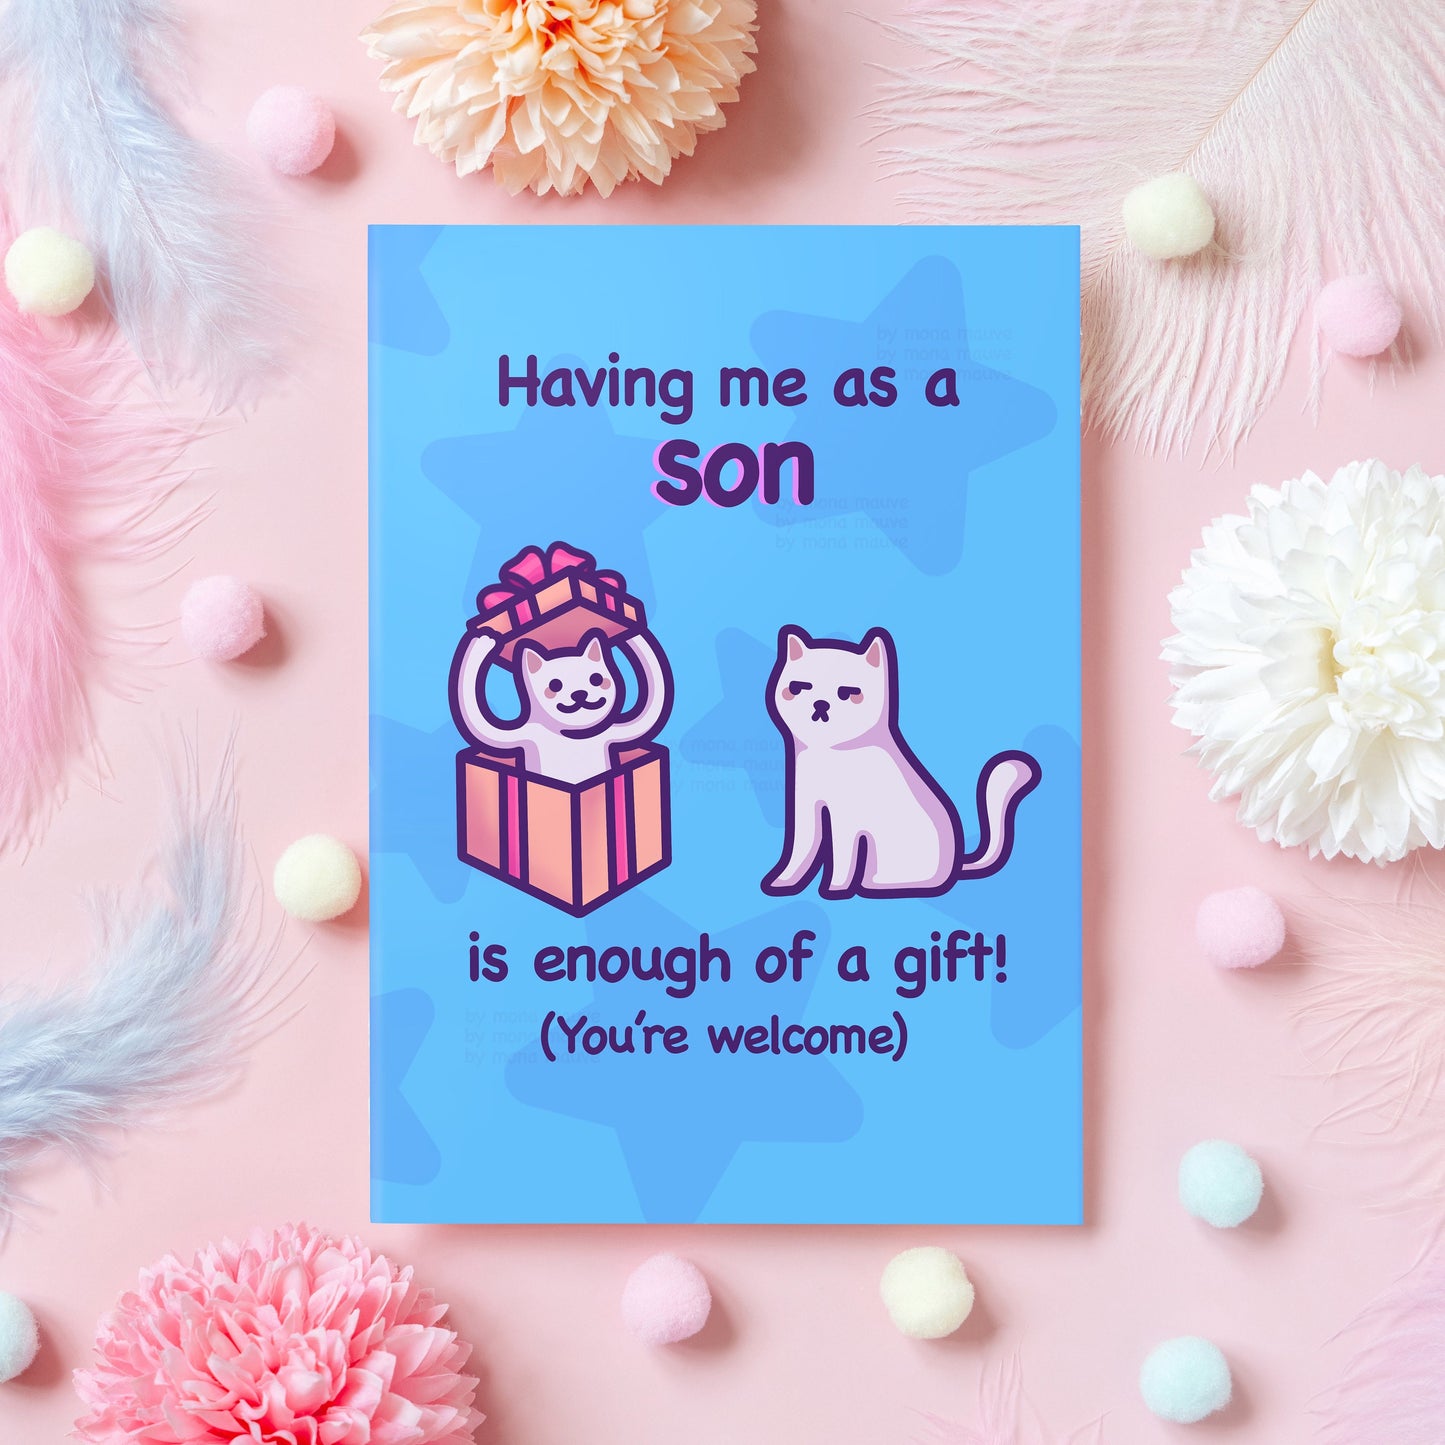 Funny Dad/Mom Birthday Card | Having Me as a Son Is Enough of a Gift! | Cute Cat Card for Birthday or Mother's/Father's Day from Son